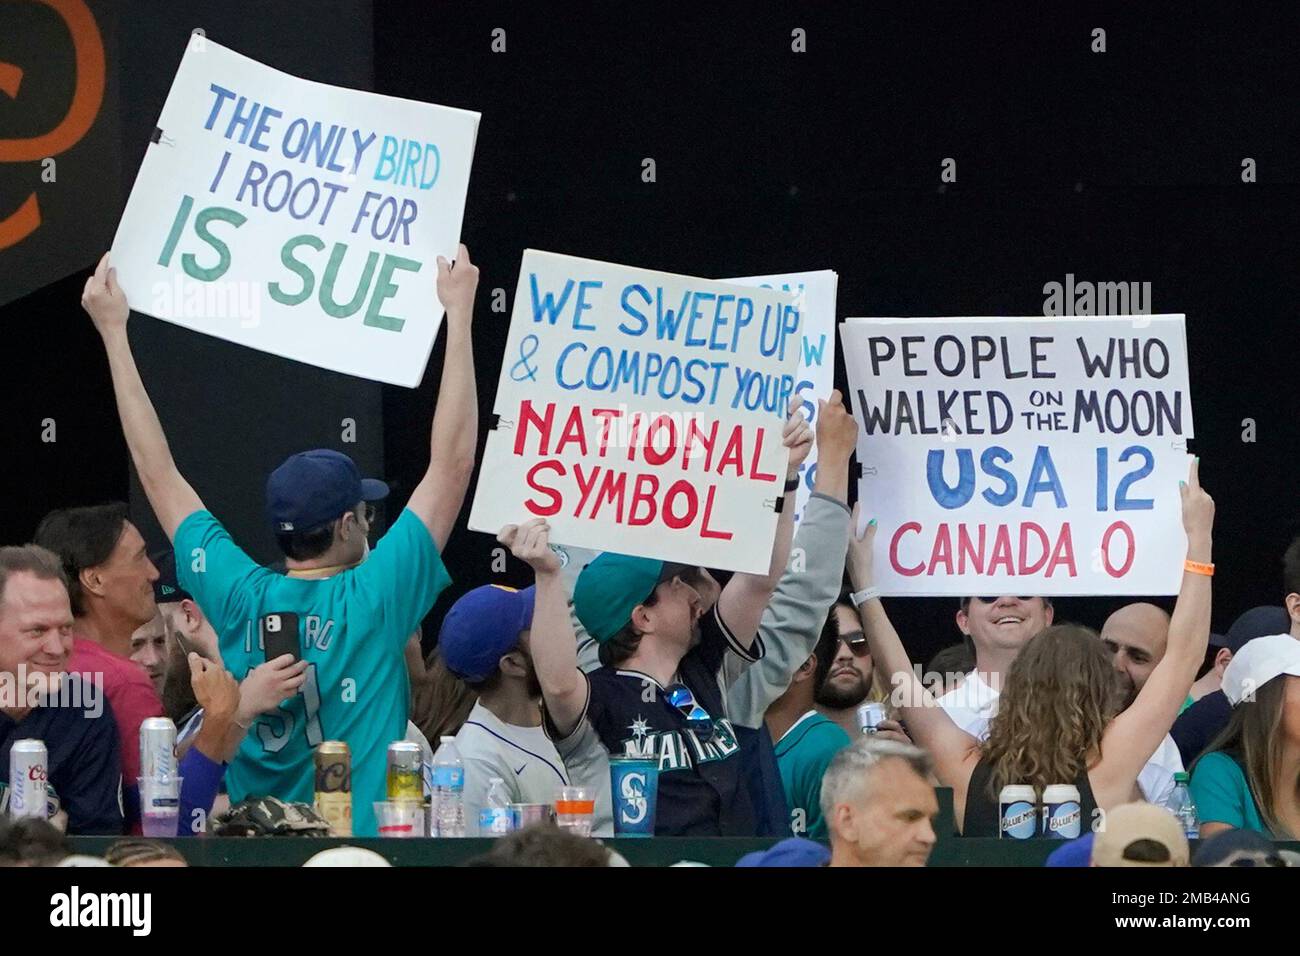 Seattle Mariners fans hold up signs mocking Canada during a baseball game  between the Mariners and the Toronto Blue Jays, Friday, July 8, 2022, in  Seattle. The sign on the left refers